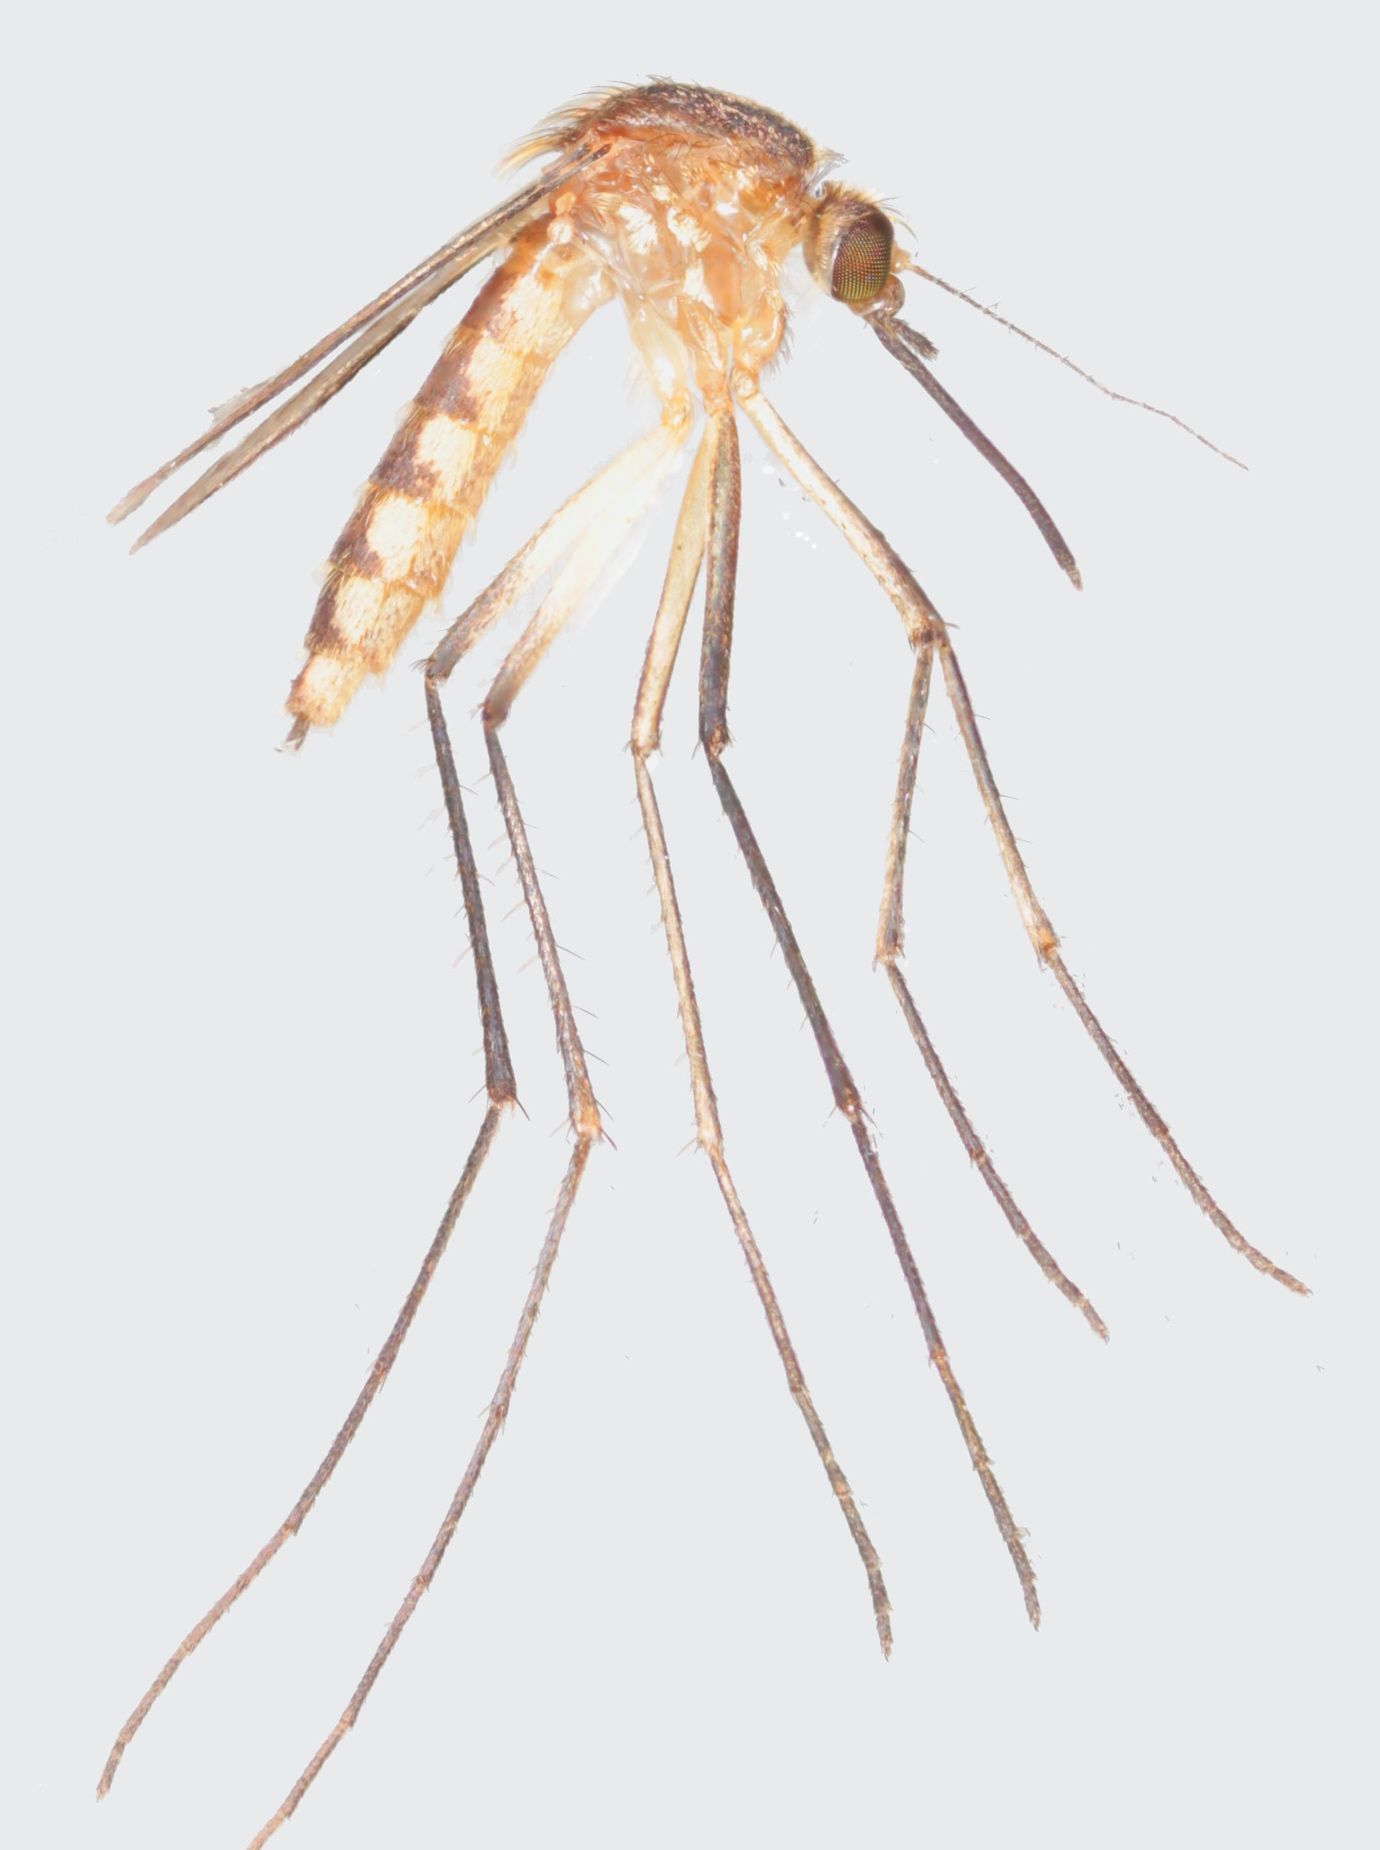 Lateral aspect of Aedes atlanticus (Dyar and Knab). 